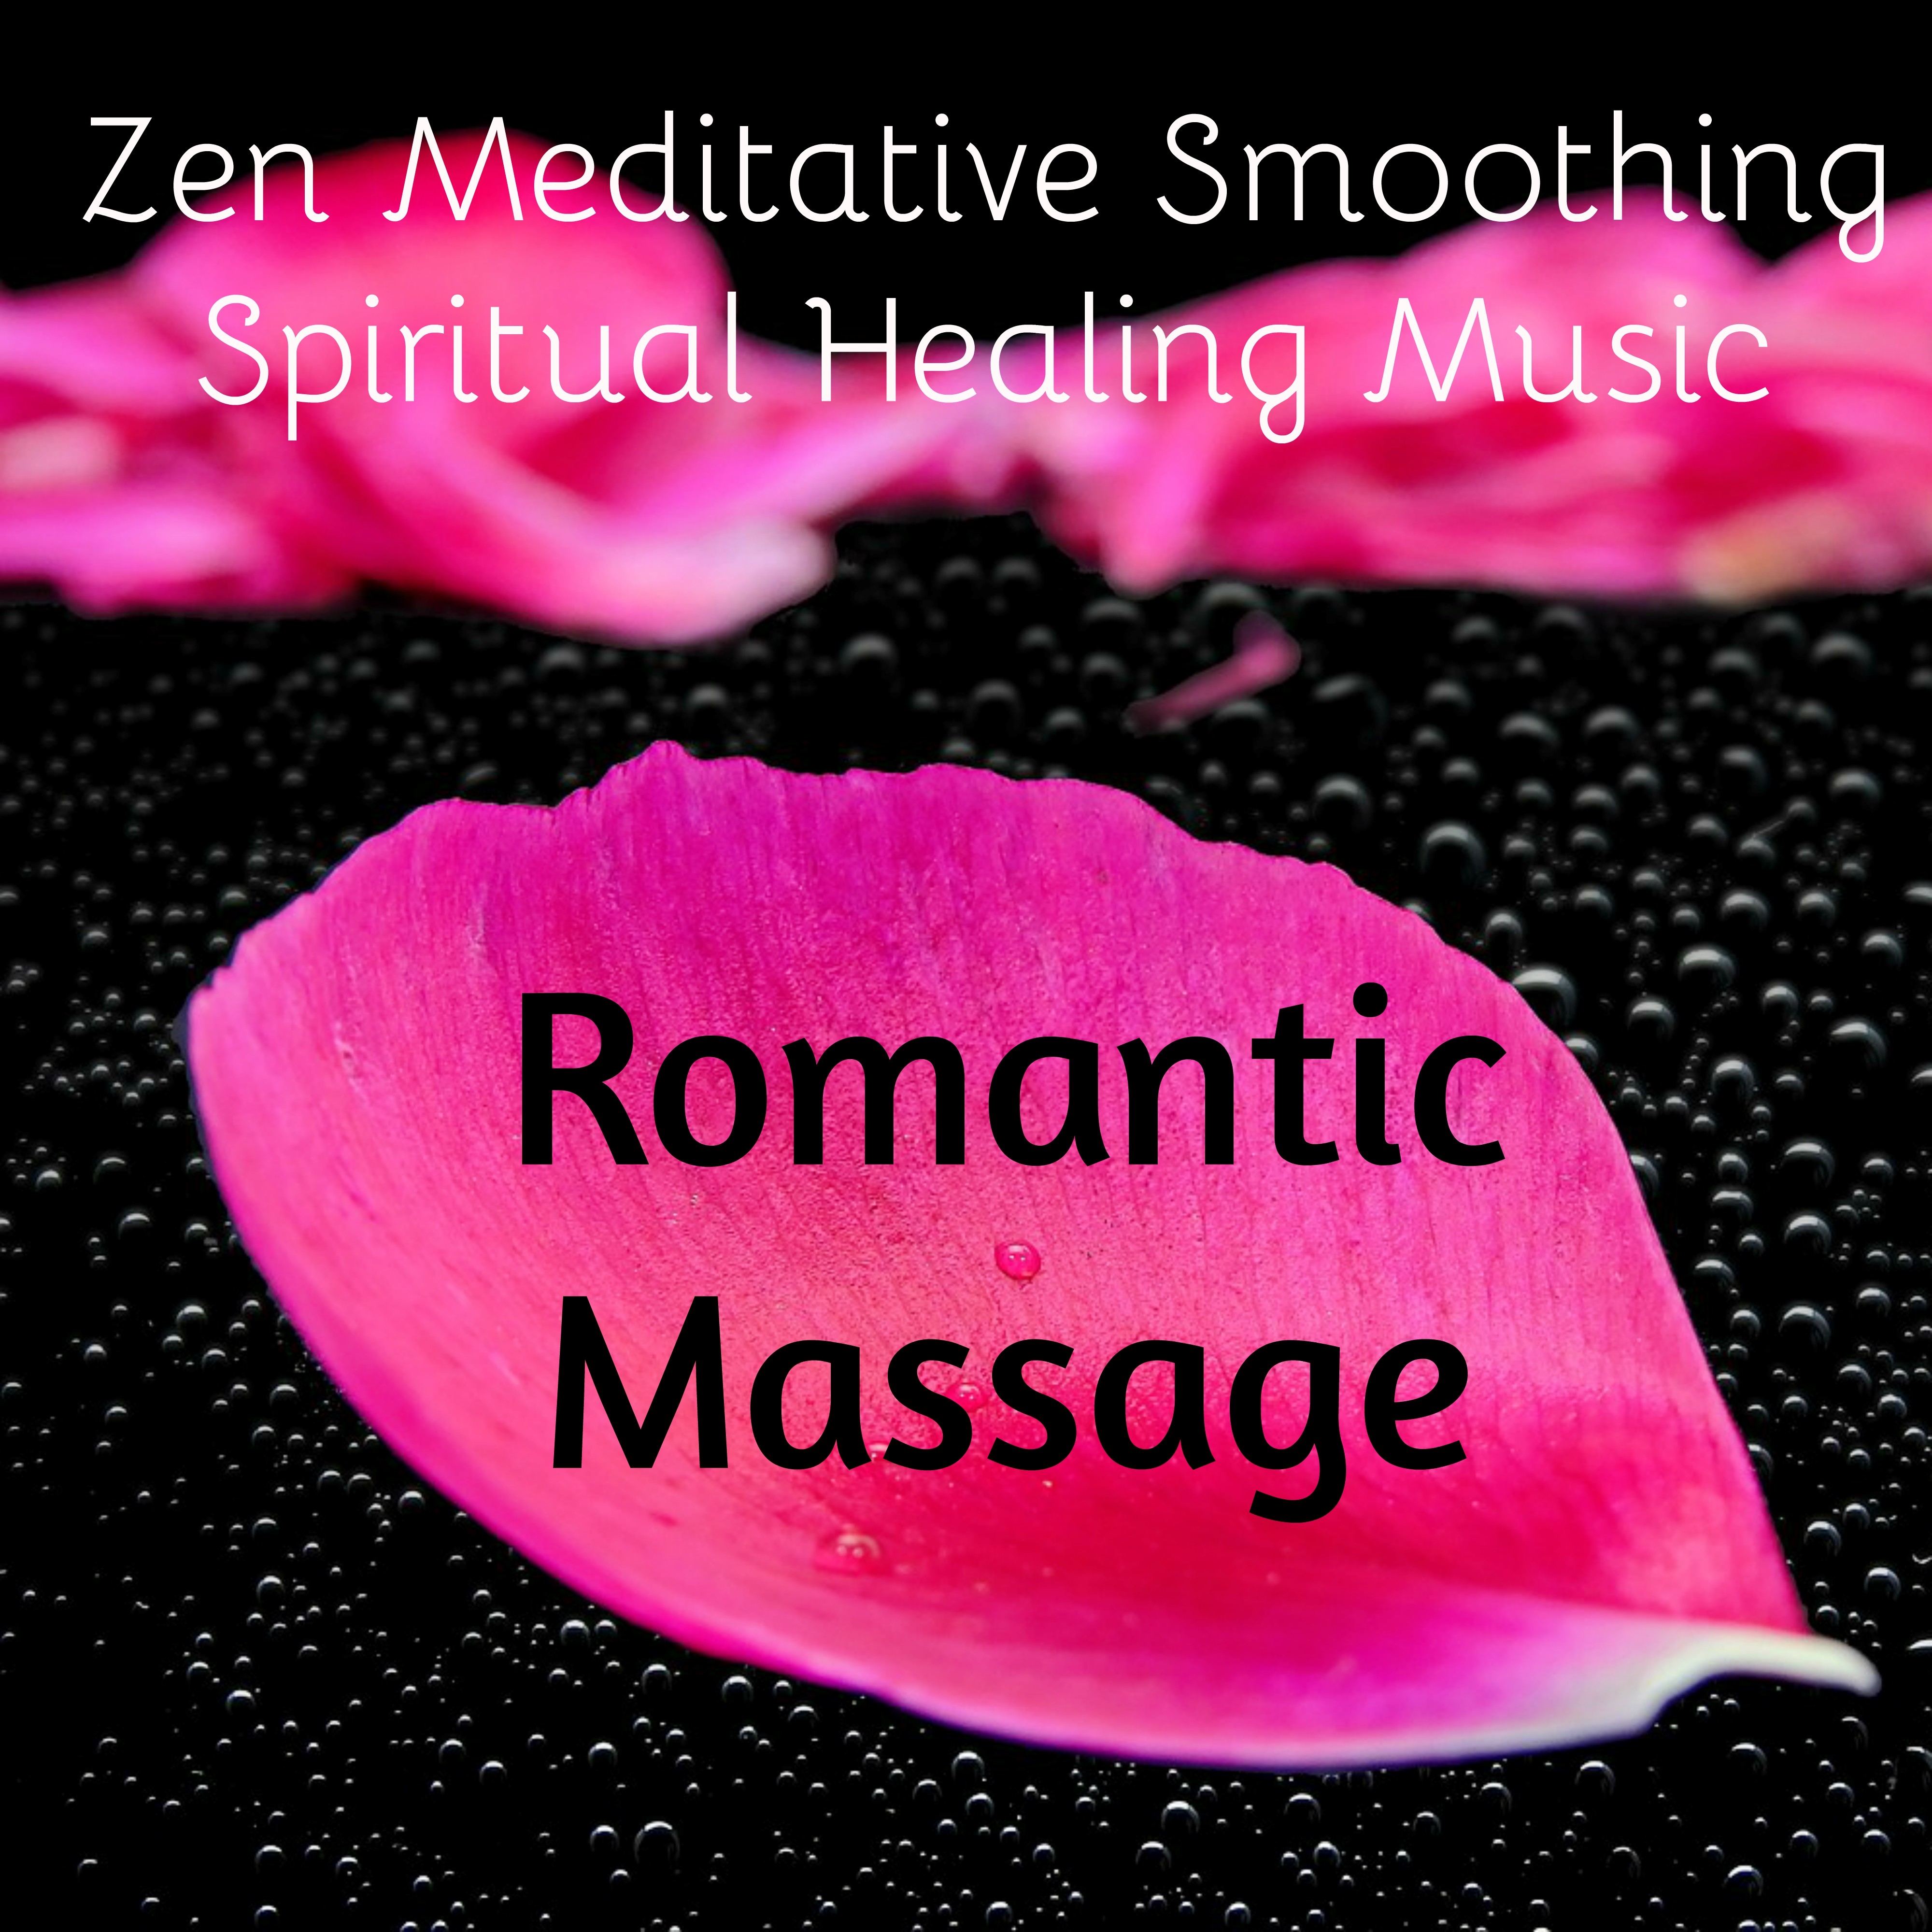 Romantic Massage - Zen Meditative Smoothing Spiritual Healing Music with Chillout Lounge Calming Sweet Sounds